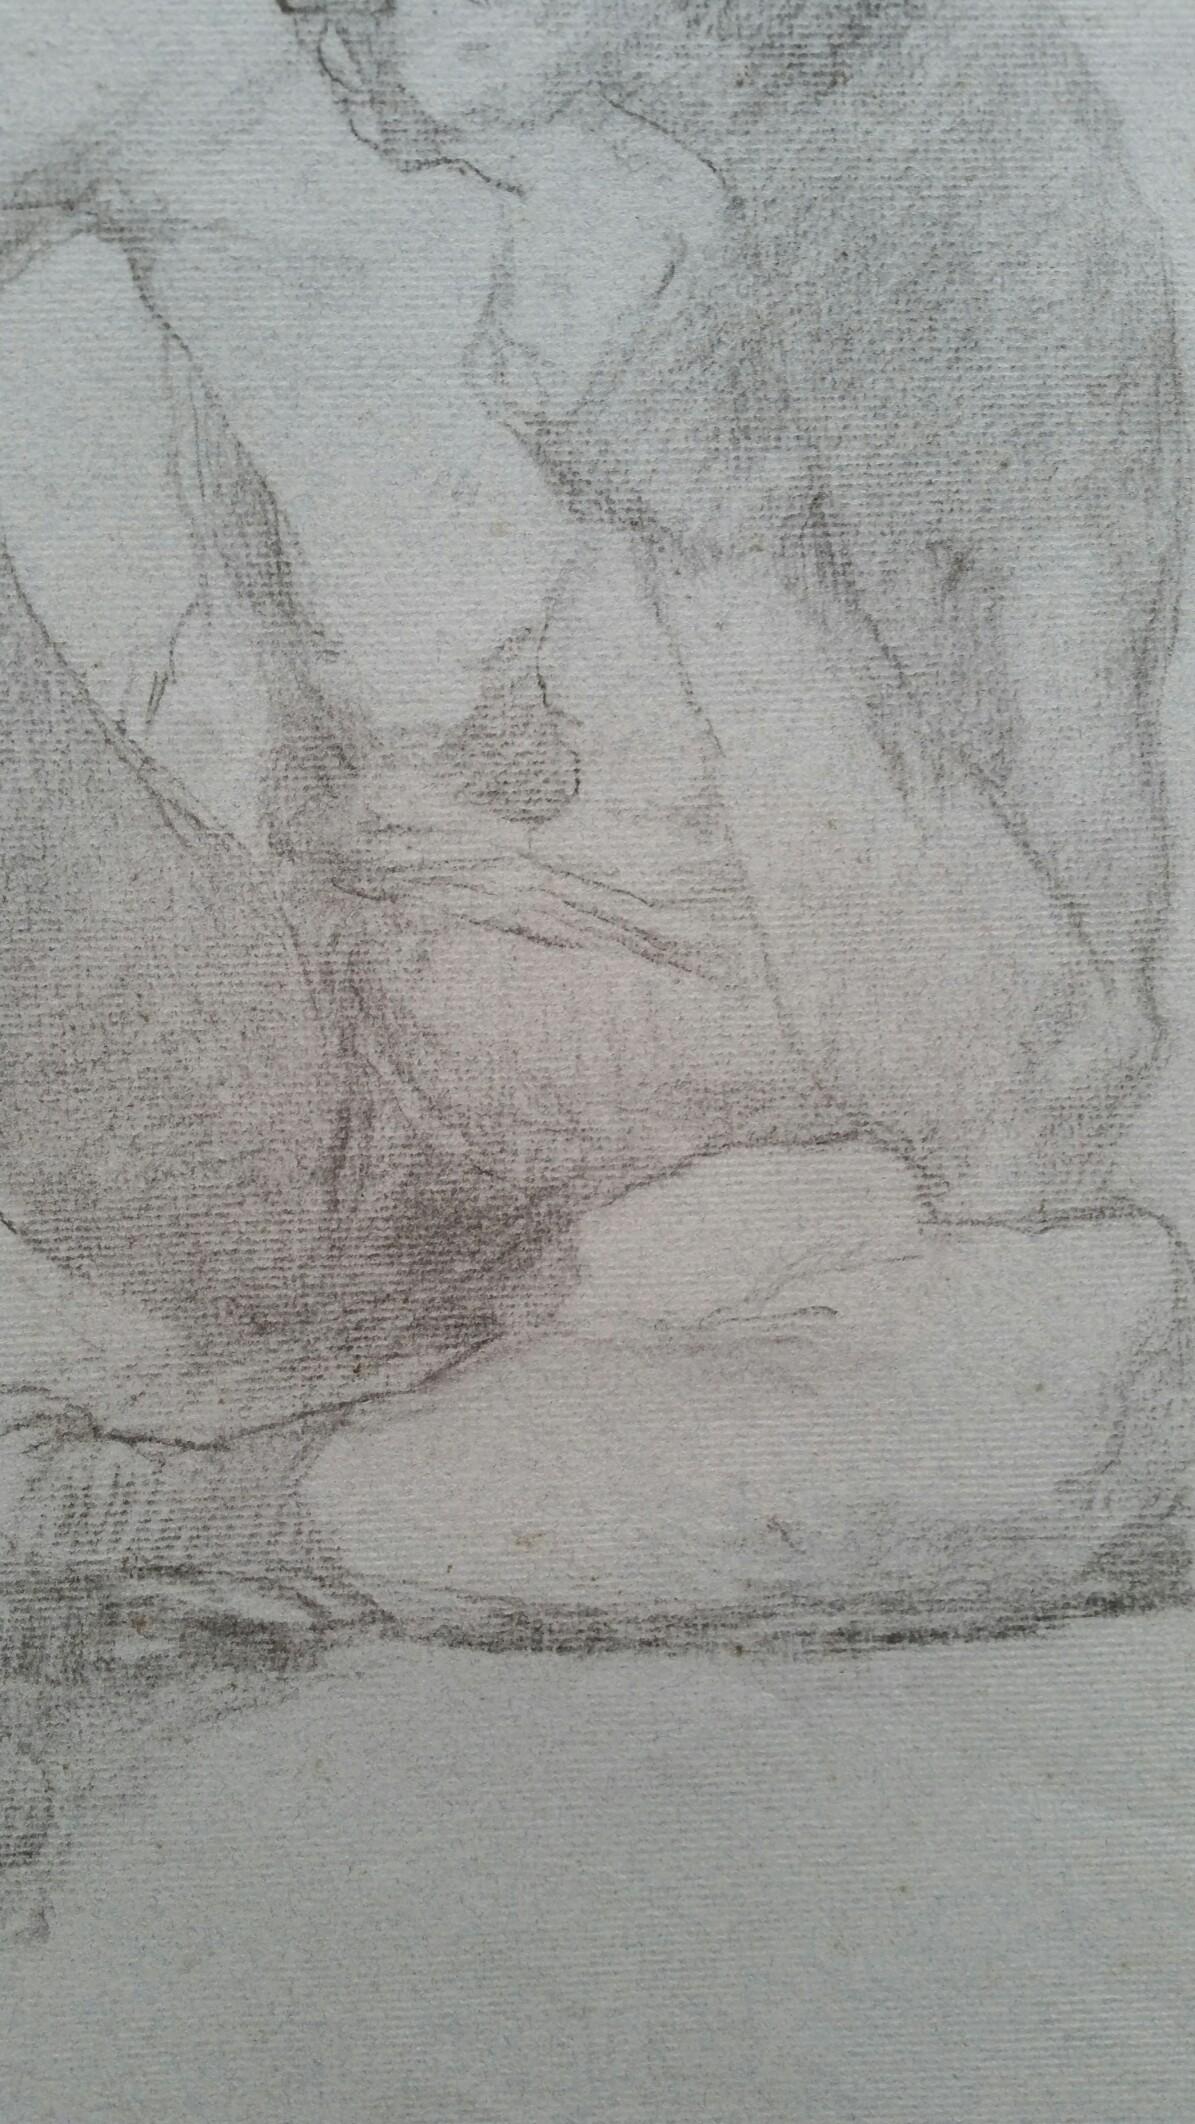 English Graphite Portrait Sketch of Male Nude, Seated 2